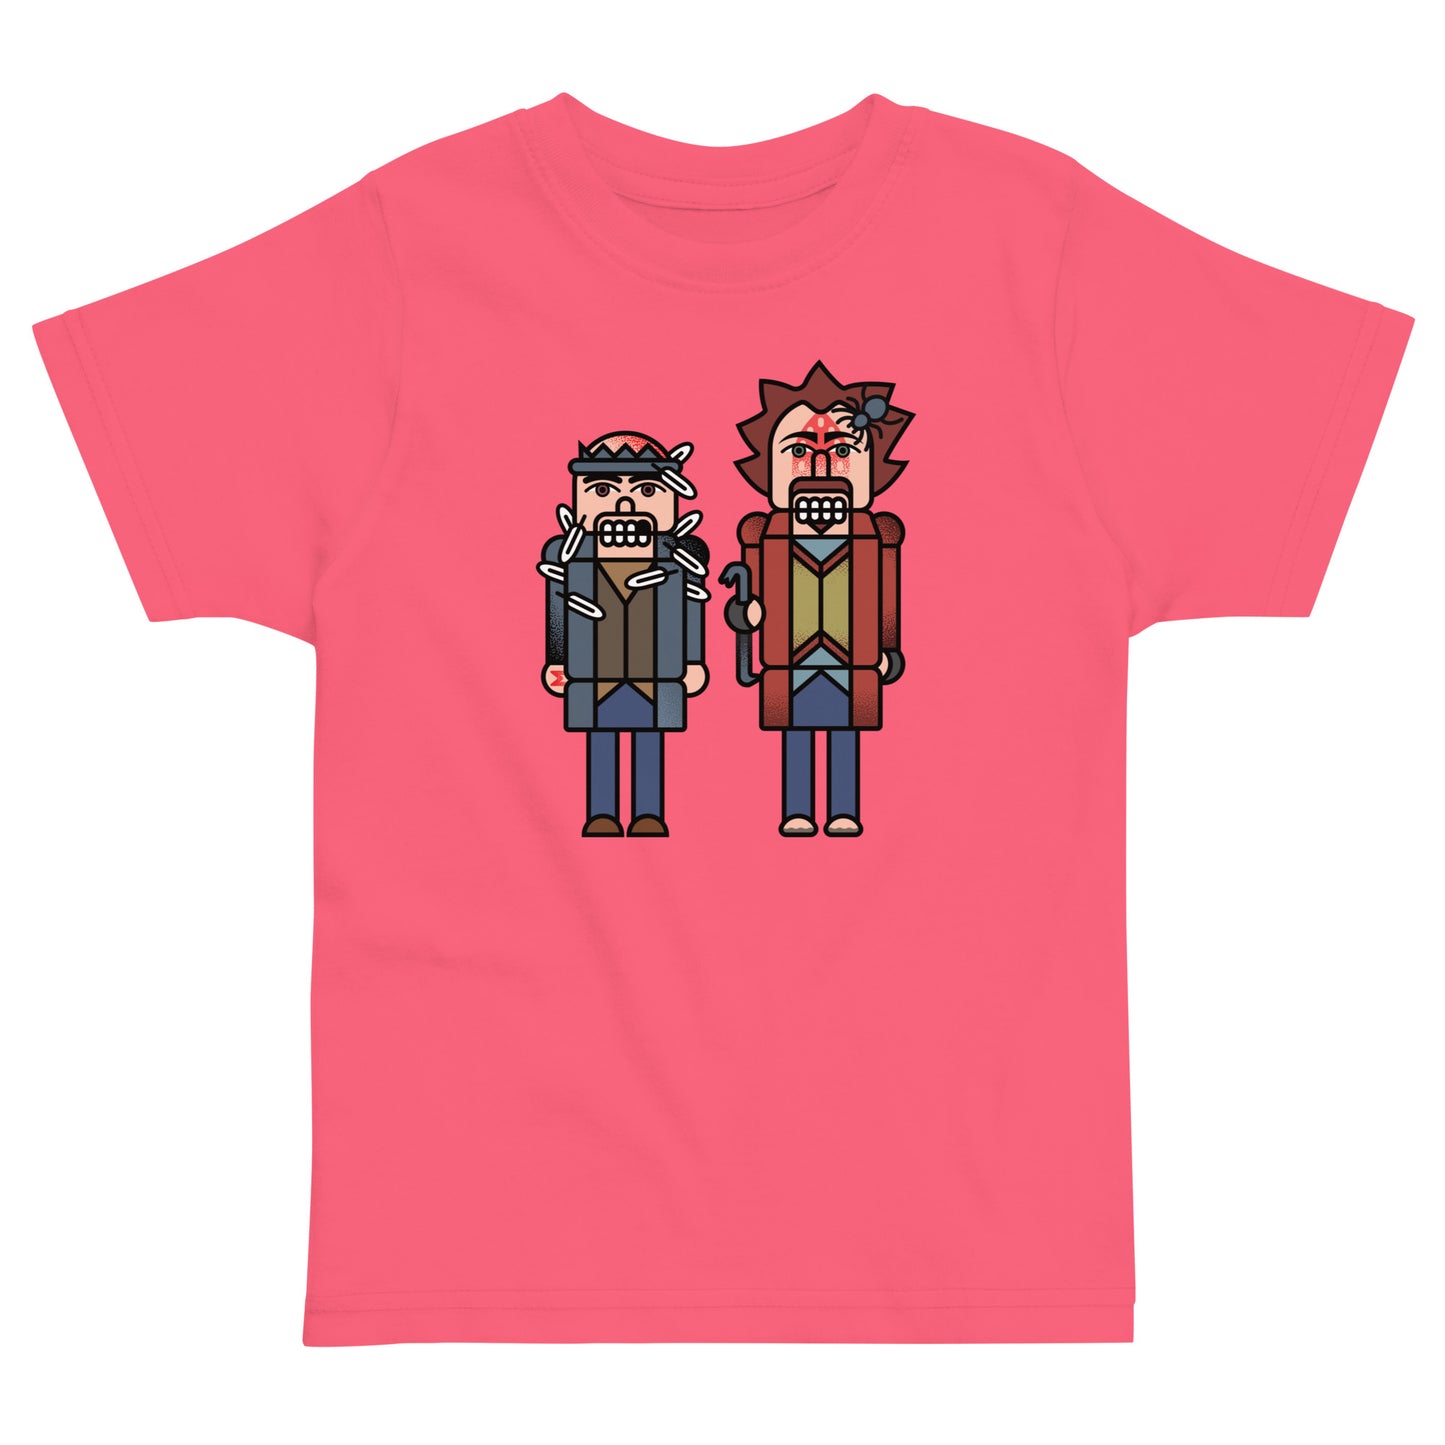 The Nutcrackers Kid's Toddler Tee